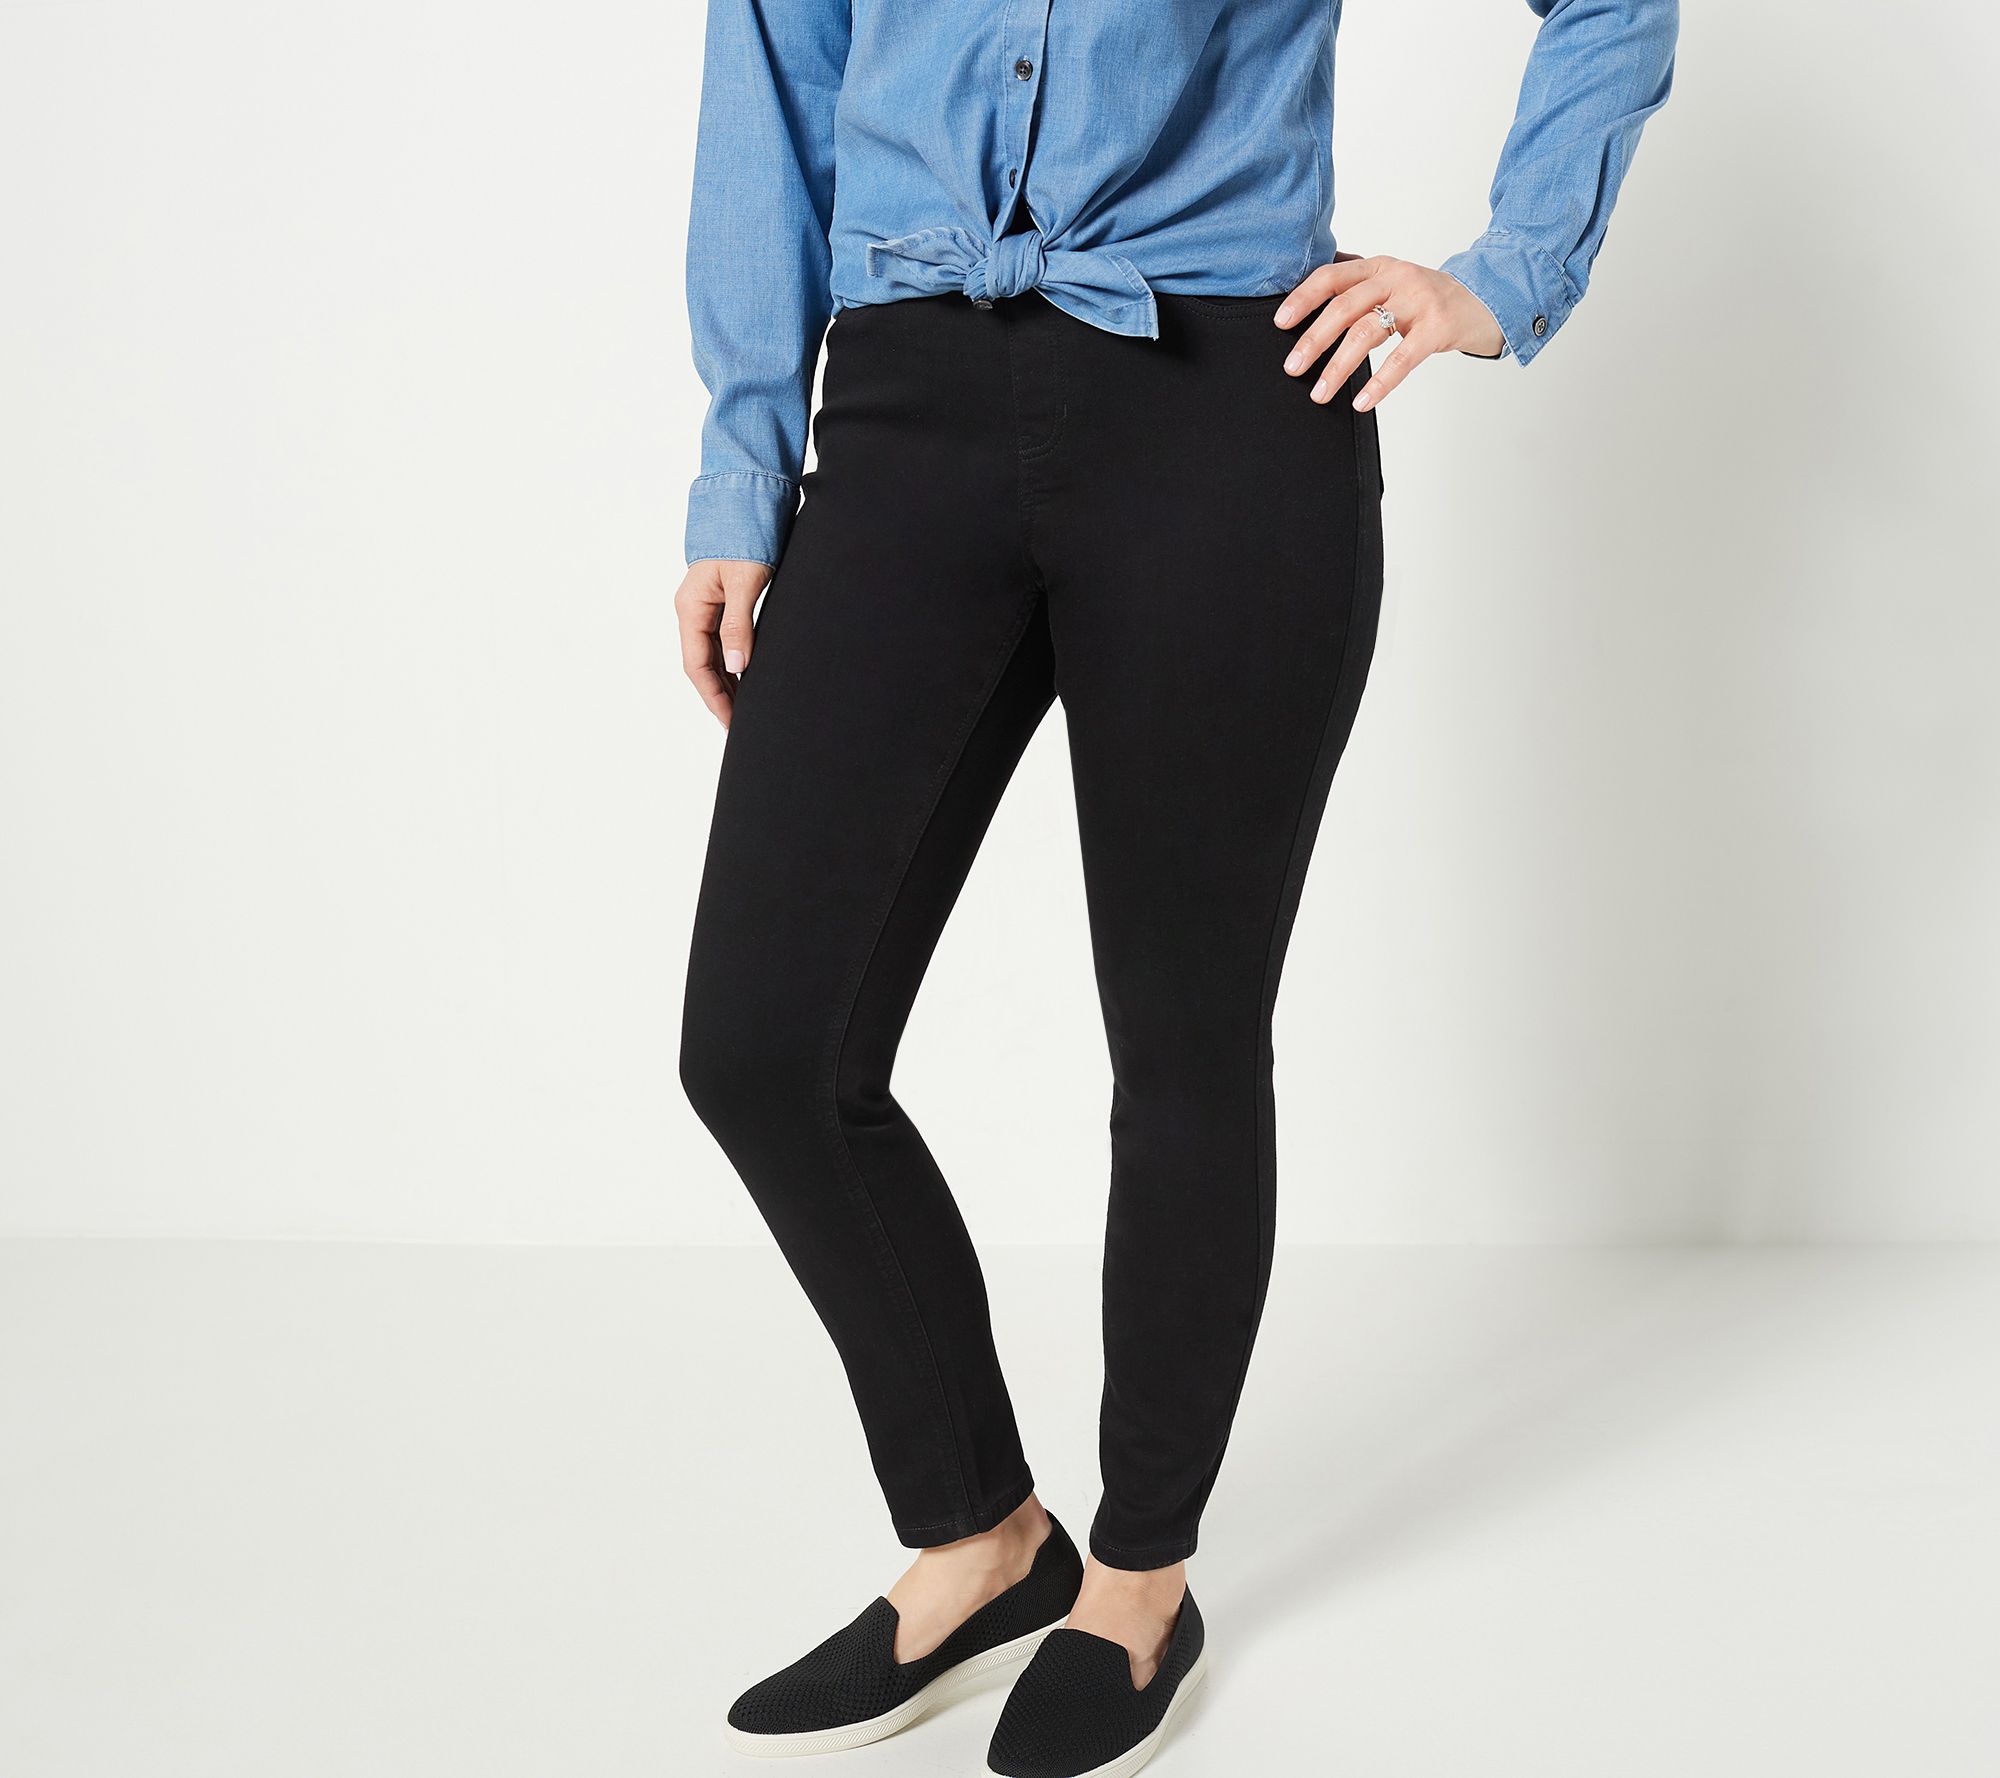 Jeggings, Tall Clothing For Women